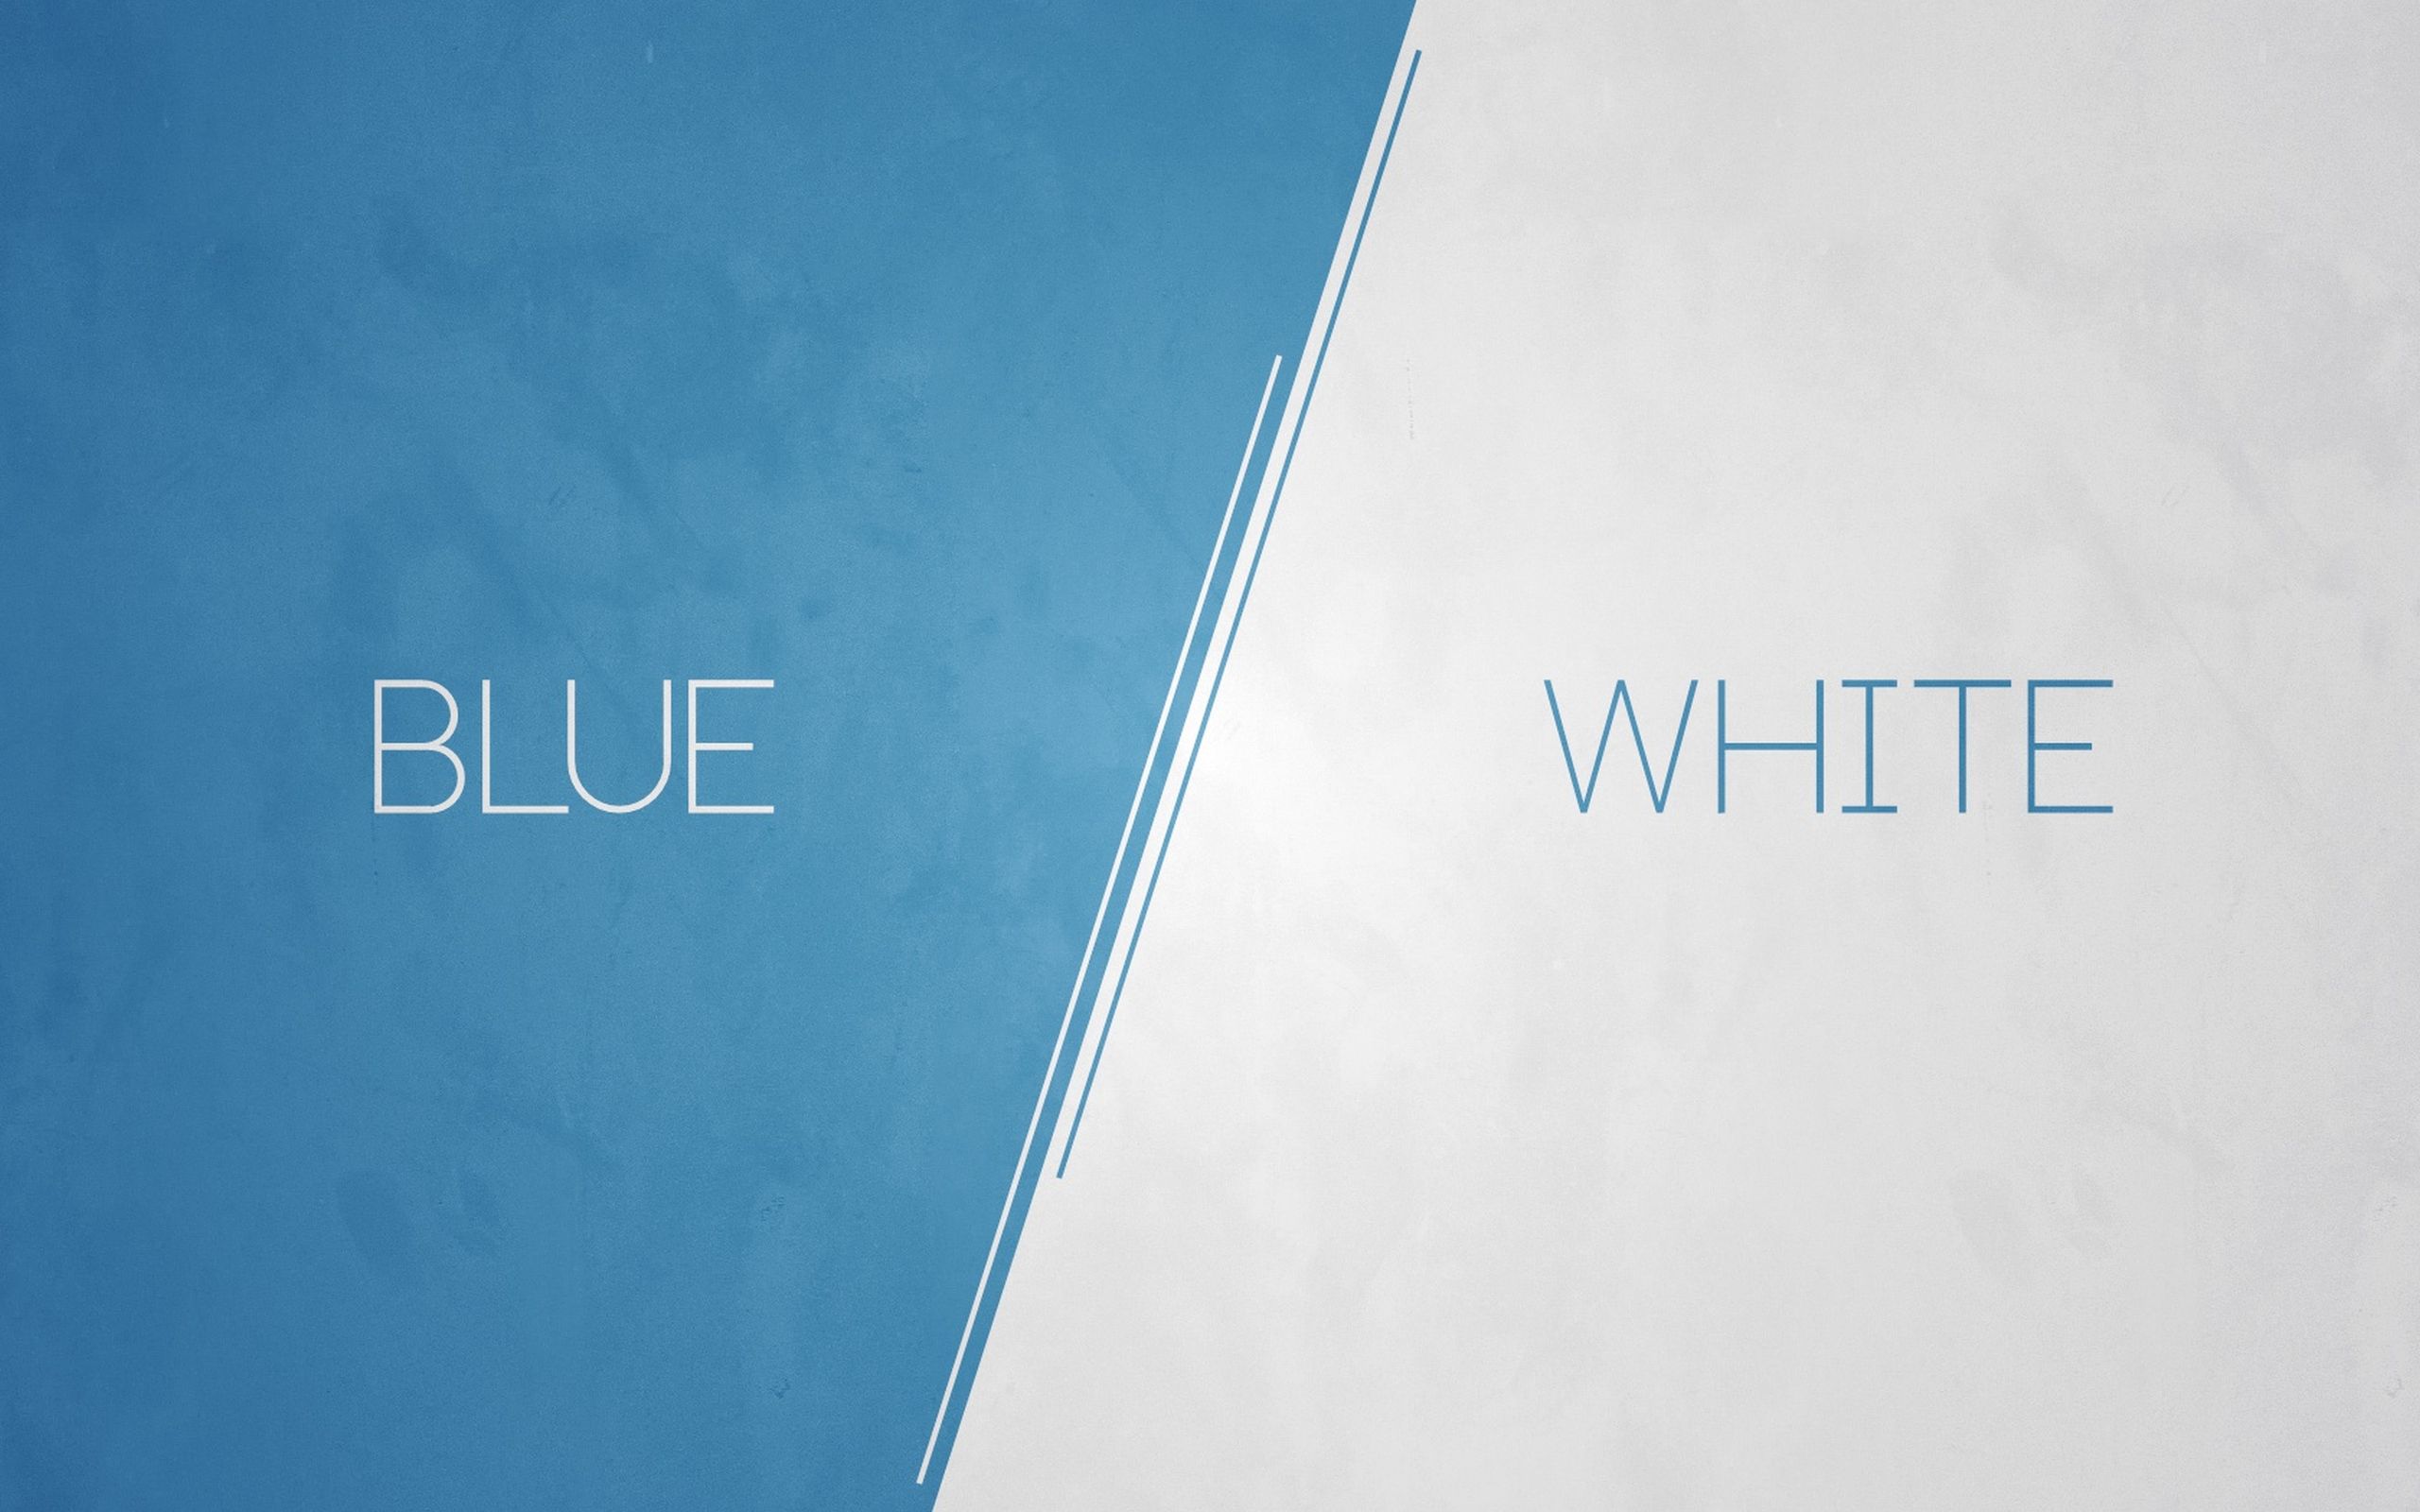 89675 free download White wallpapers for phone, blue, inscription, words White images and screensavers for mobile